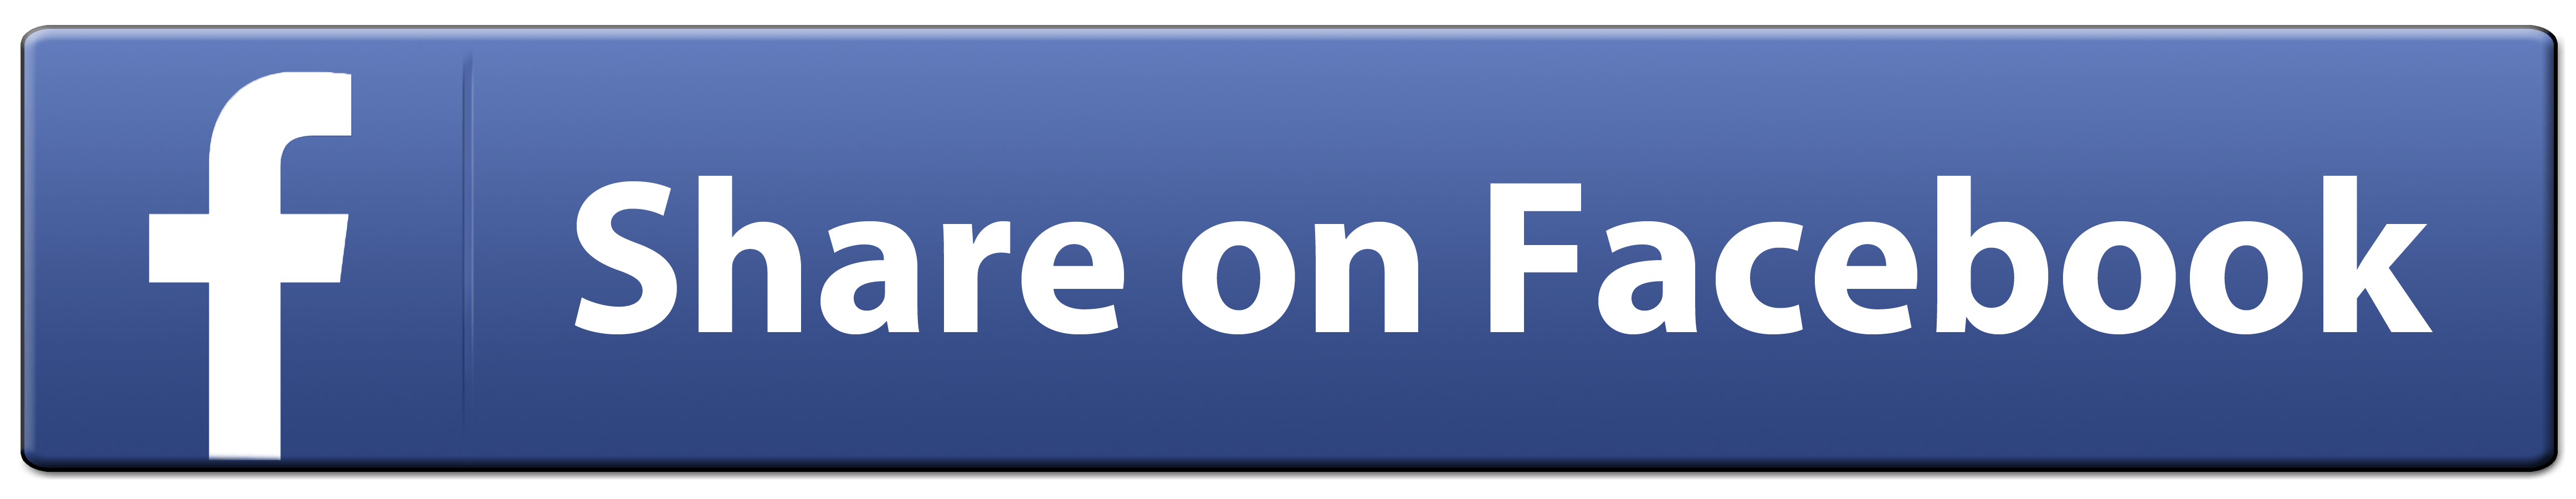 Facebook New Word Logo - Langroo - Learn a Language on Facebook. Message us today Meta